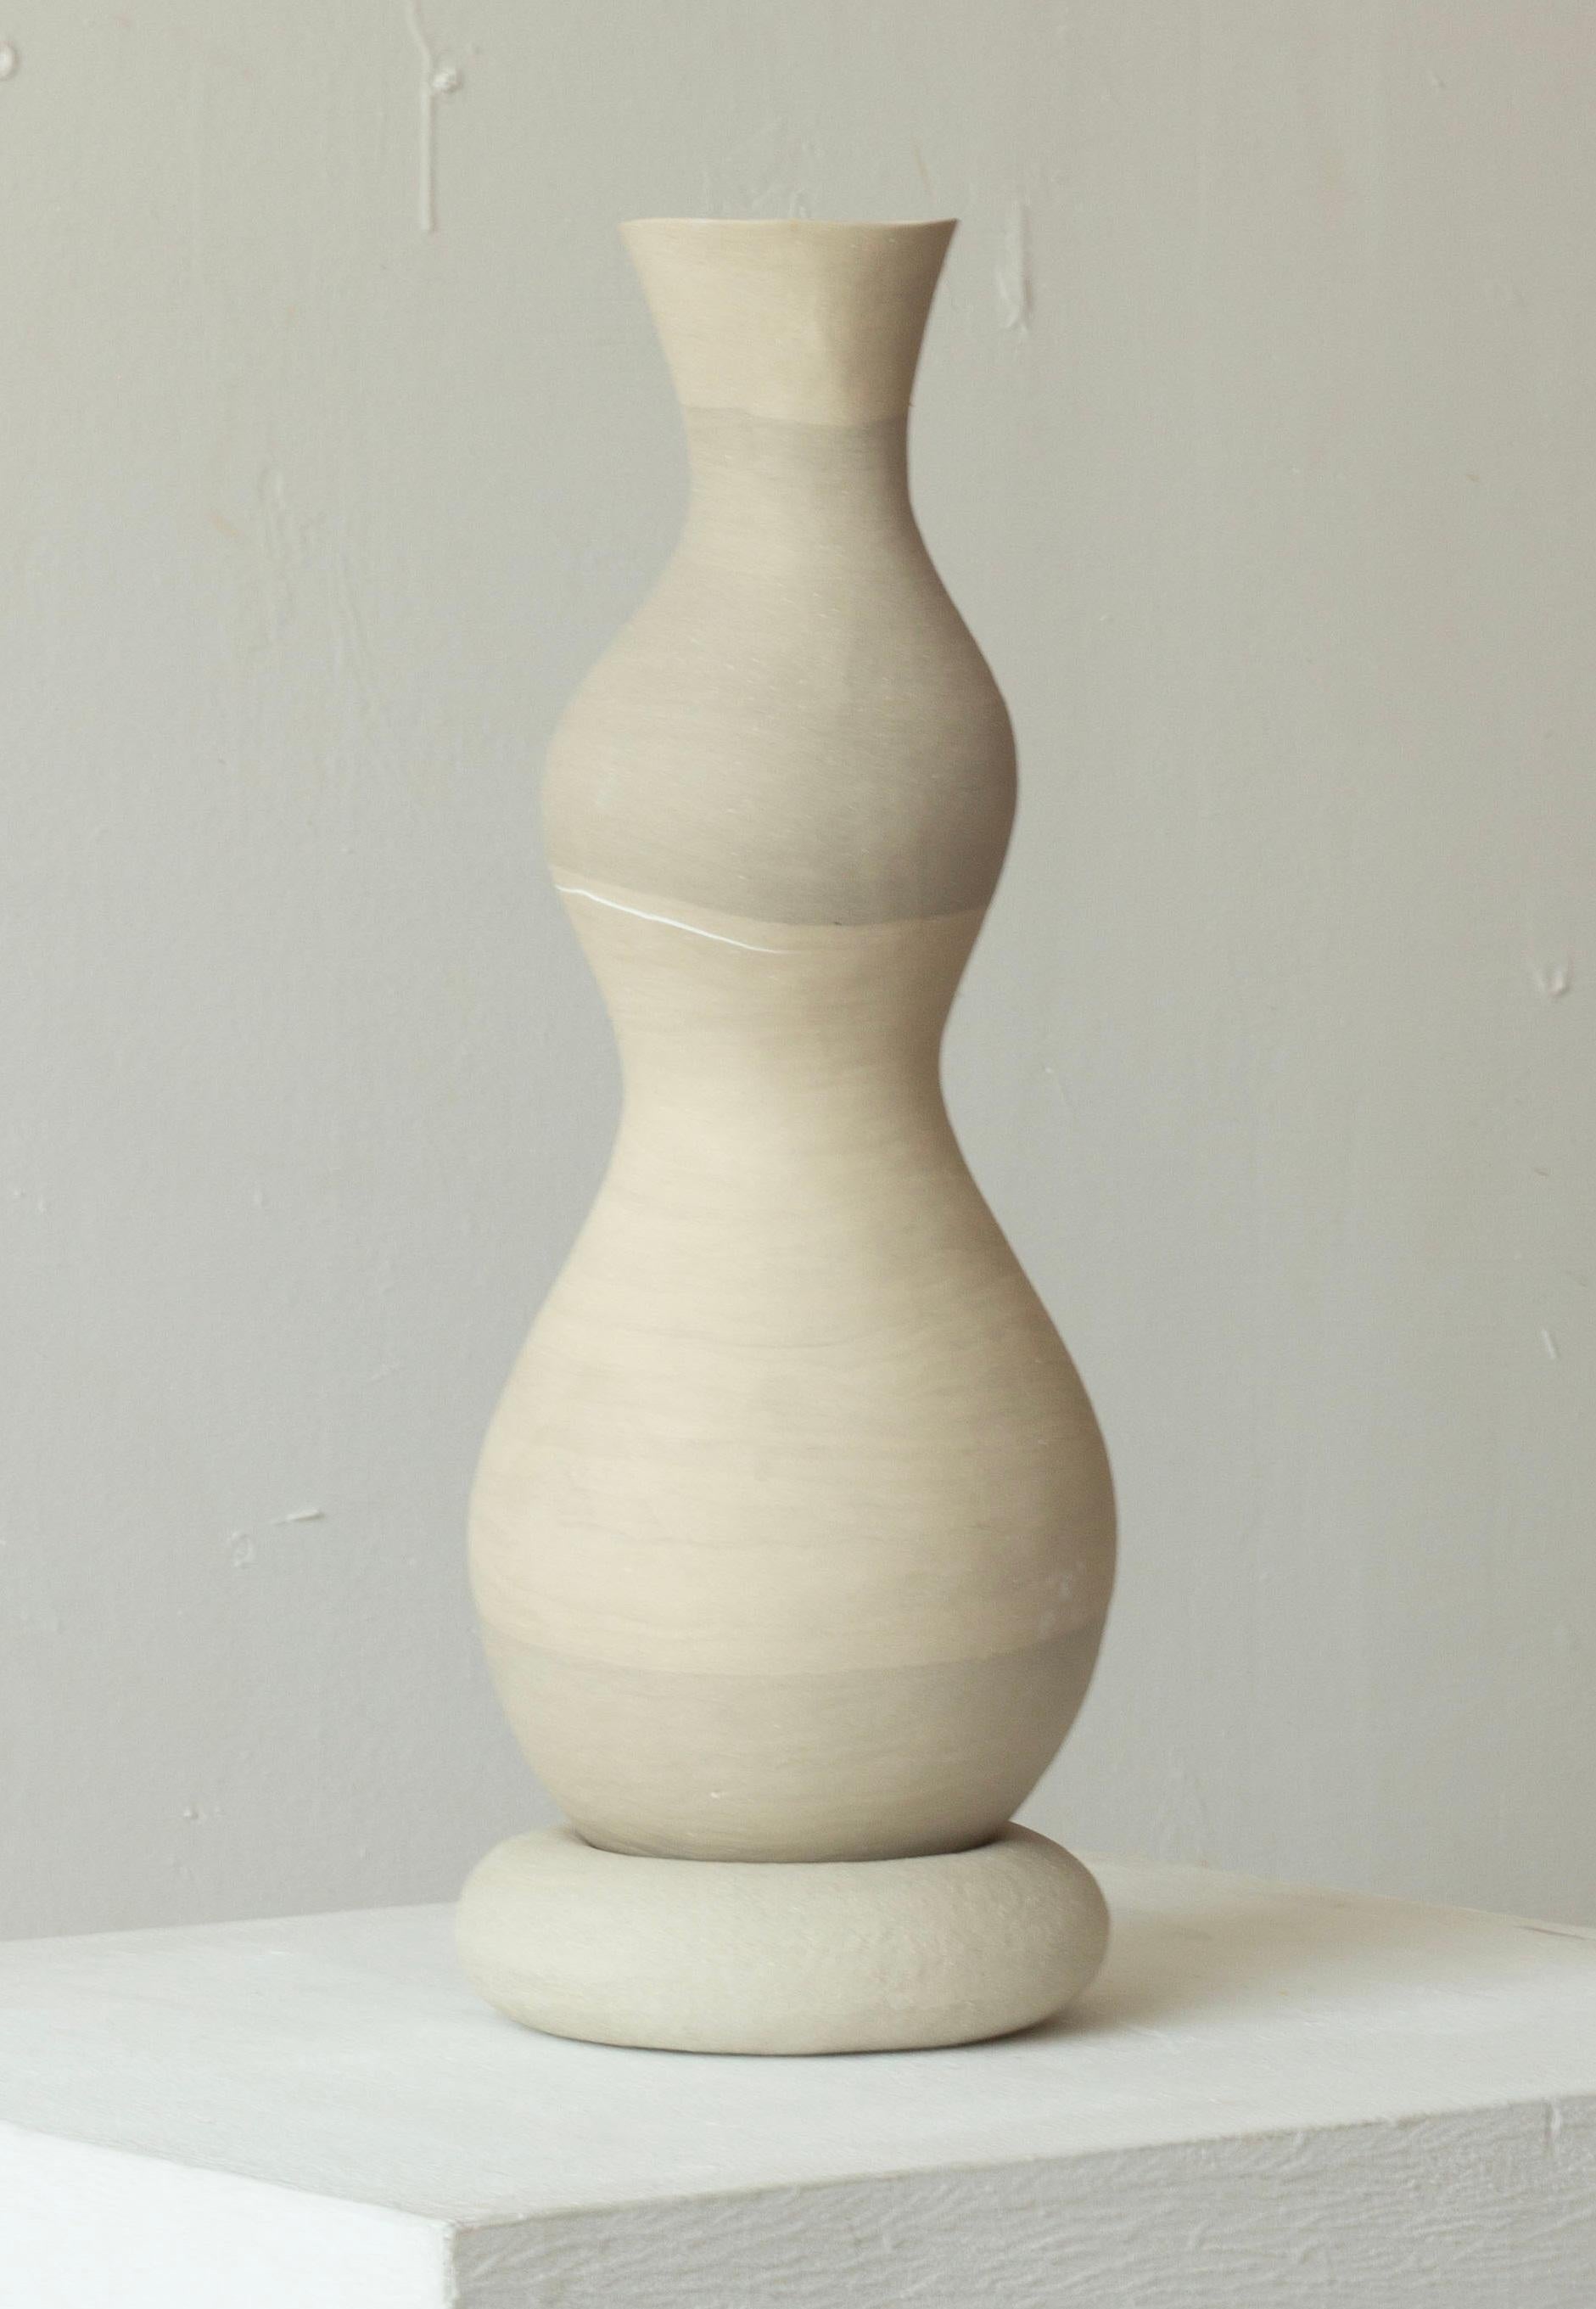 Woman 208 Vase by Karina Smagulova
One of a Kind.
Dimensions: Ø14 x H 38 cm.
Materials: White and grey stoneware.
​
With an Armenian and Kazakhstan heritage, Karina Smagulova was born in Greece in 1995 and graduated with a diploma in Architecture